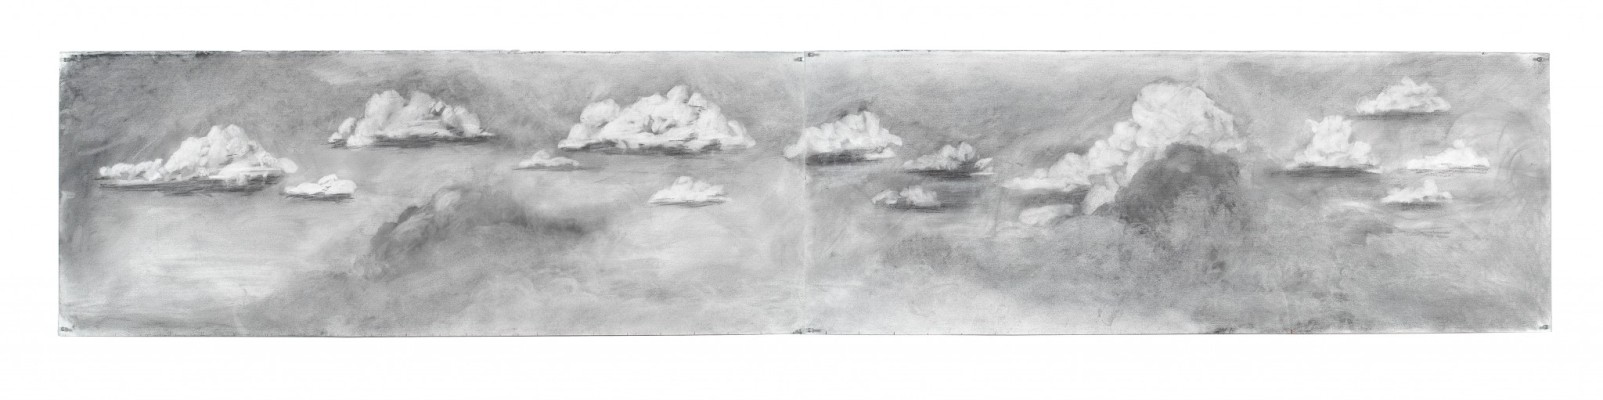 <div class="lightbox-artworktitle">Preparing the Flute (Panoramic IV Clouds)</div><div class="lightbox-artworkyear">2005</div><div class="lightbox-artworkdescription">Charcoal and Pastel on Paper</div><div class="lightbox-artworkdimension">60 x 316 cm</div><div class="lightbox-artworkdimension"></div><div class="lightbox-tagswithlinks"><a rel='nofollow' href='/page/1/?s=%23Charcoal'>#Charcoal</A> <a rel='nofollow' href='/page/1/?s=%23Paper'>#Paper</A> <a rel='nofollow' href='/page/1/?s=%23TheMagicFlute'>#TheMagicFlute</A></div>